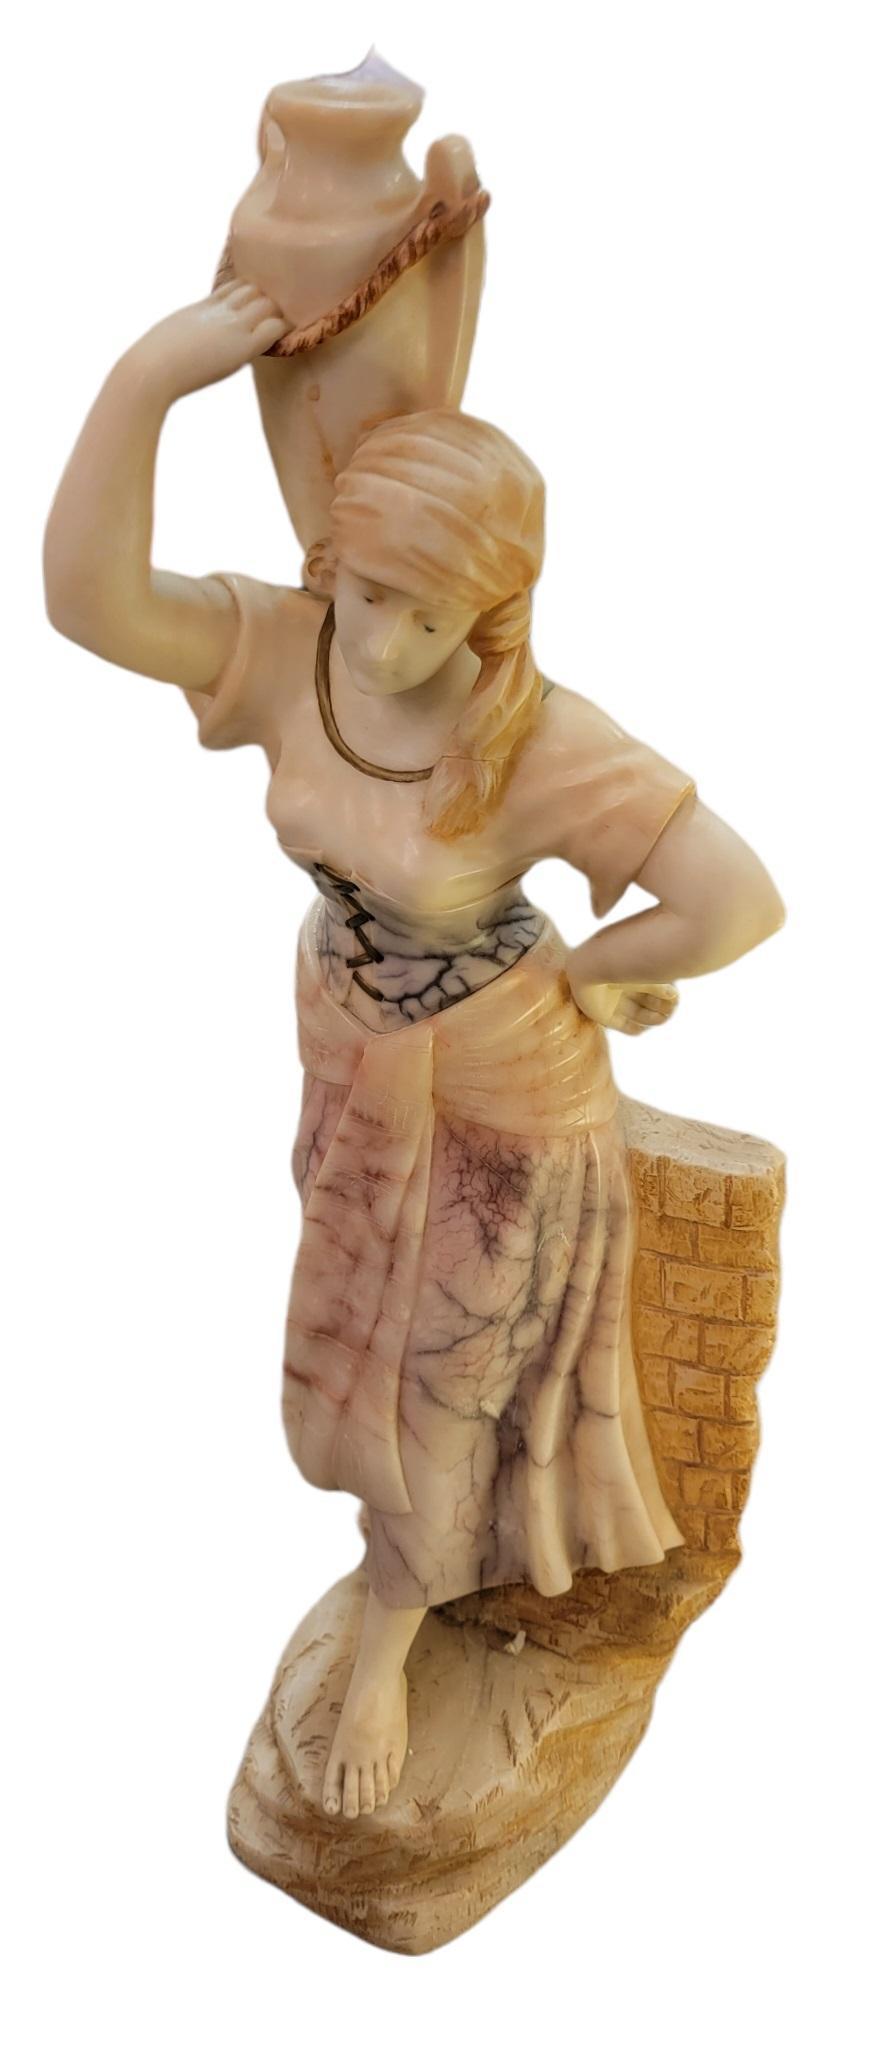 19thc Hand carved marble alabaster figural woman statue holding up a vase/canister bare foot in traditional working garments. Heavy base. Heavy item.